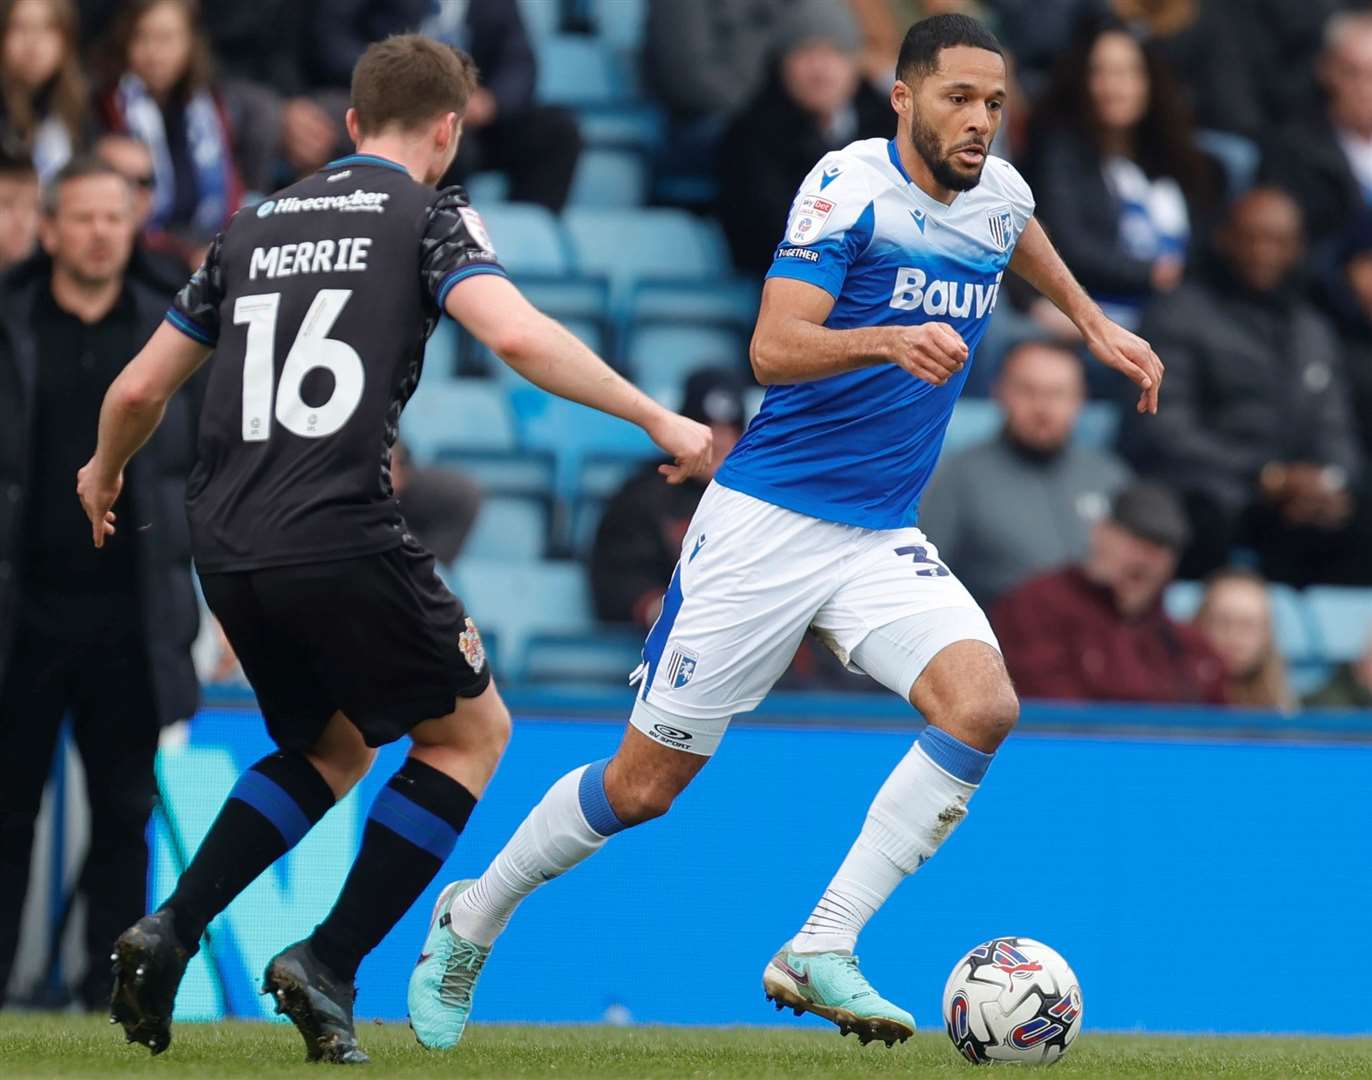 Gillingham's Tim Dieng up against Tranmere player Chris Merrie in midfield – the Frenchman was controversially denied a stoppage-time winning goal on Saturday. Picture: Julian_KPI